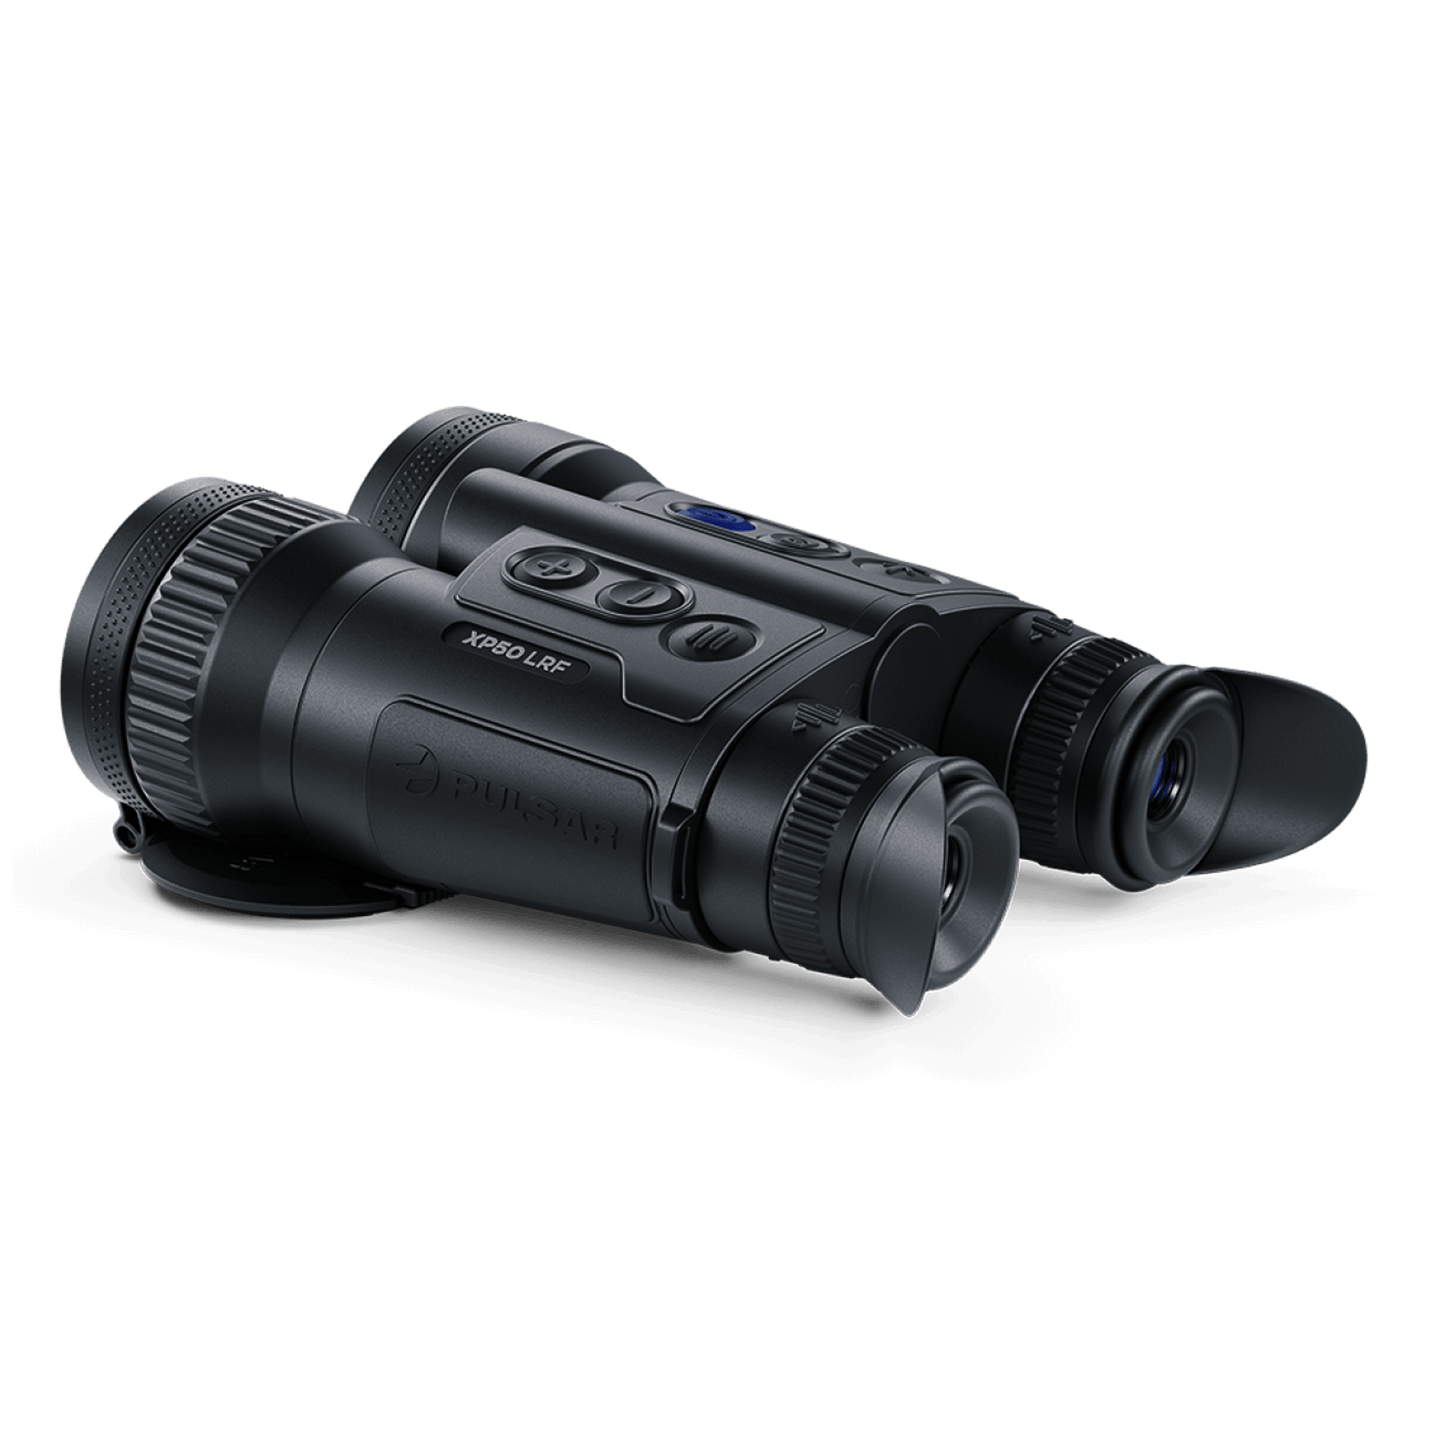 Pulsar Merger LRF XP50 Pro Thermal Imaging Binoculars for Sale with Cape Thermal Rear Left View